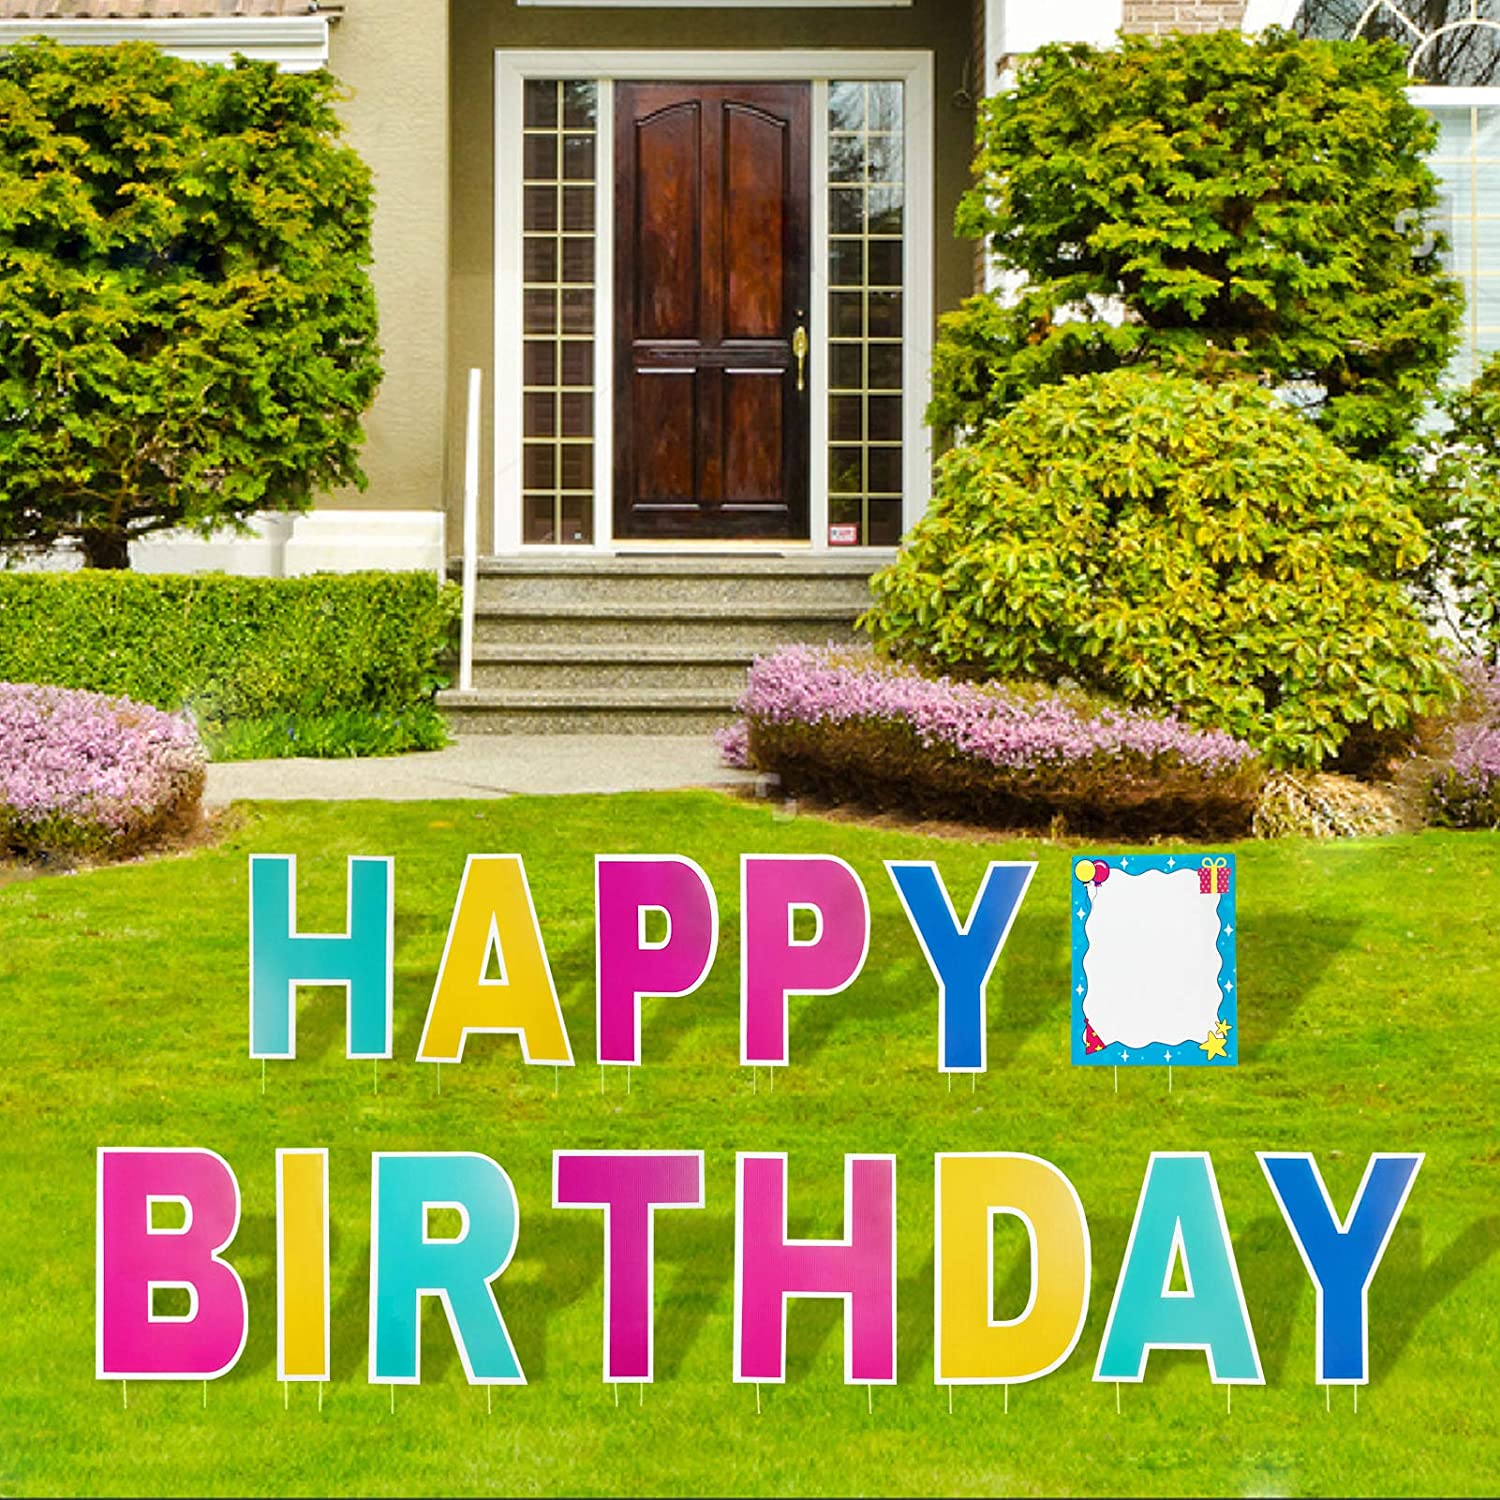 Super Purchasing for Elf Garden Ornaments - Happy Birthday Yard Sign 16 Inch Birthday Letters Lawn Sign Colorful Birthday Yard Decoration with Stakes Cake Balloon Waterproof Garden Lawn Decor for ...